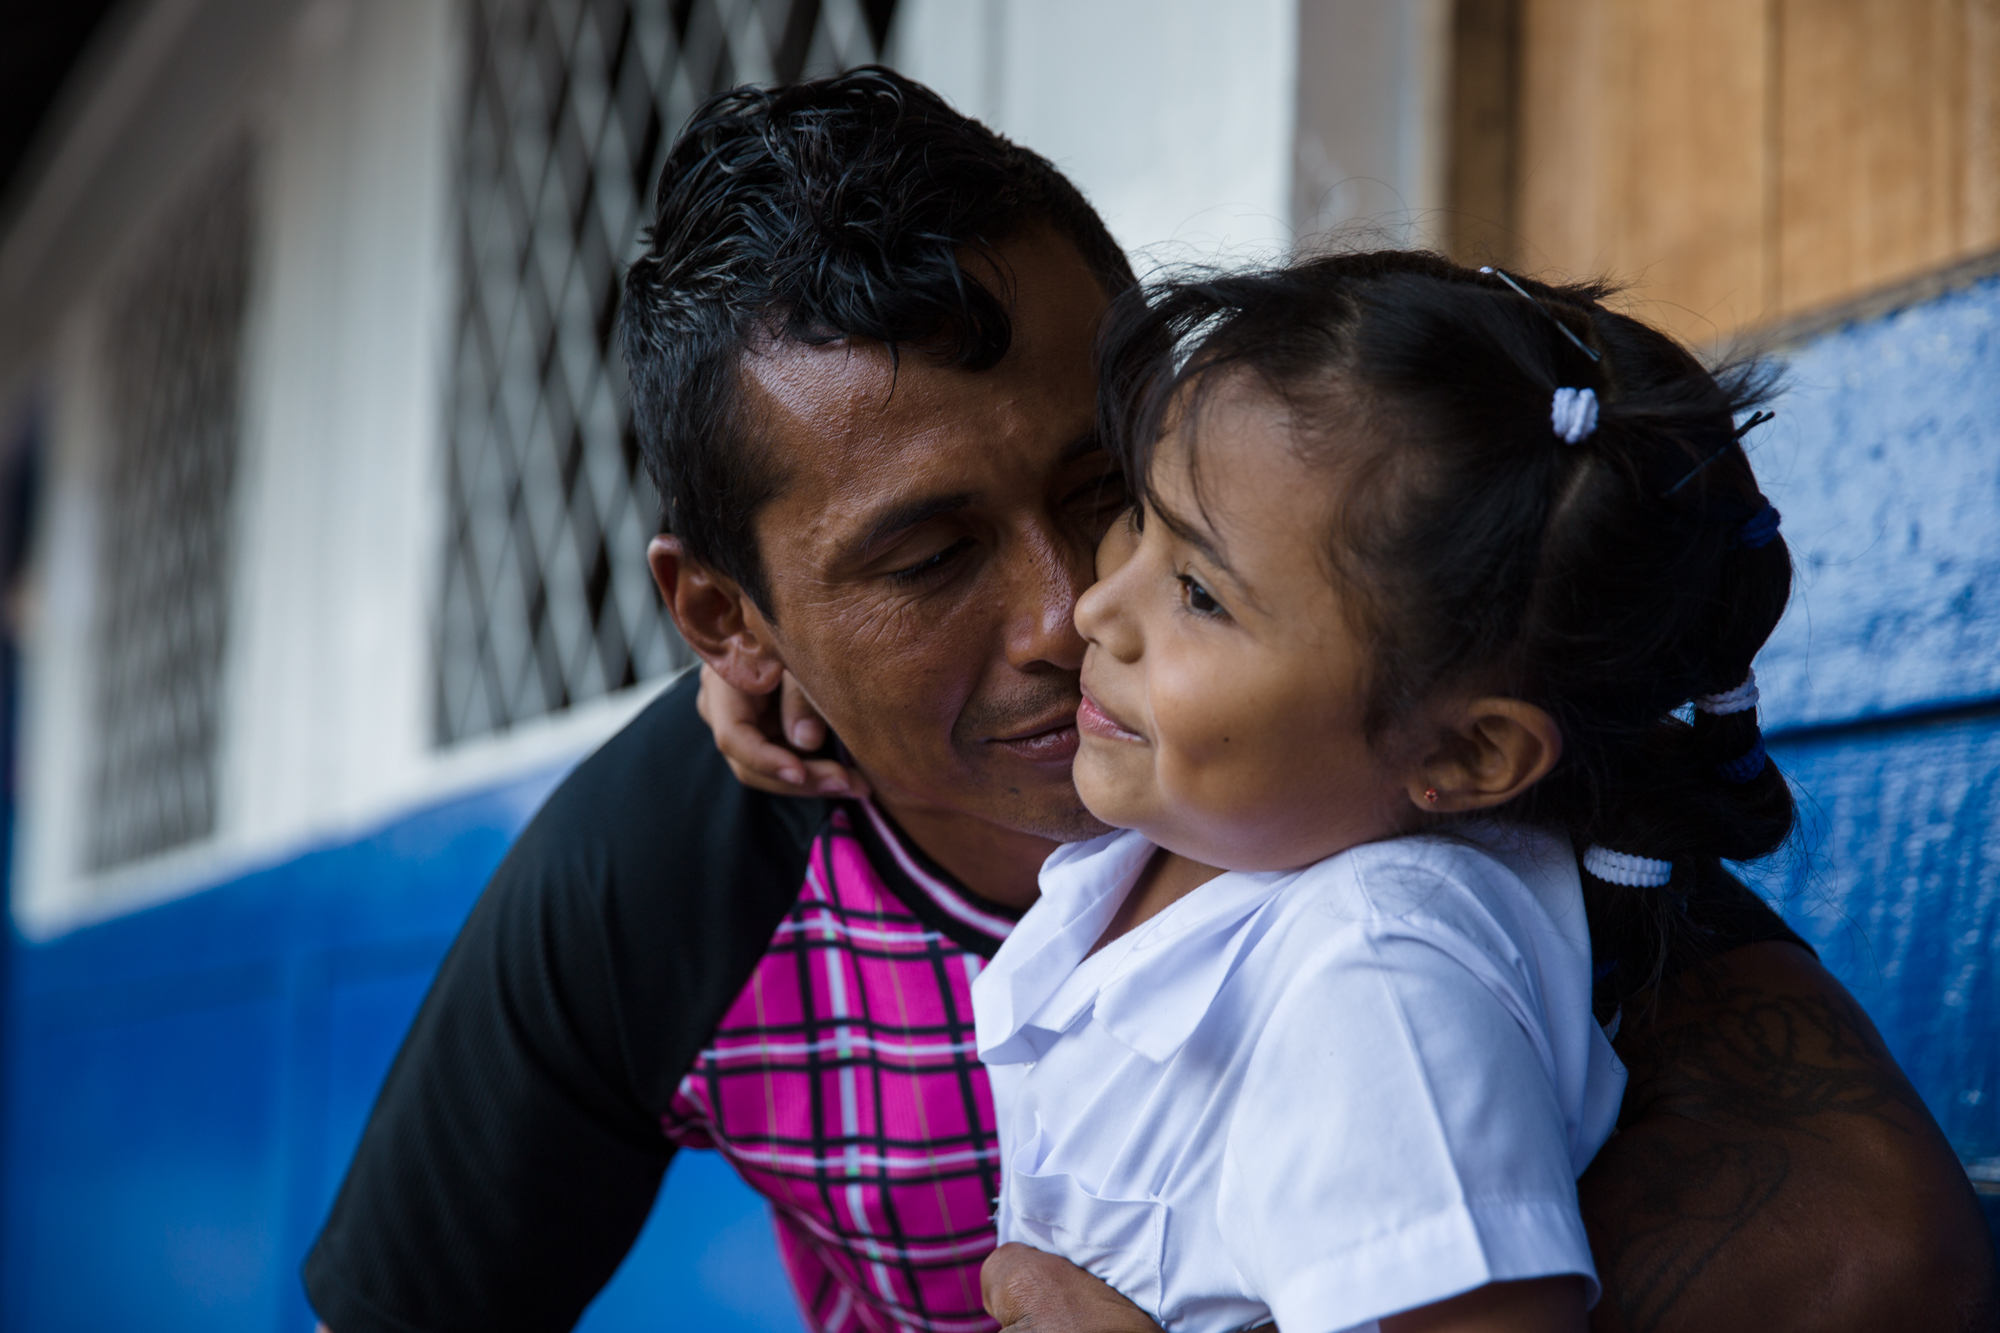  Jairo Blanchard greets his daughter at the end of the school day in Matagalpa, Nicaragua. His family is incredibly important to him and has helped him refocus his priorities and change his life. 